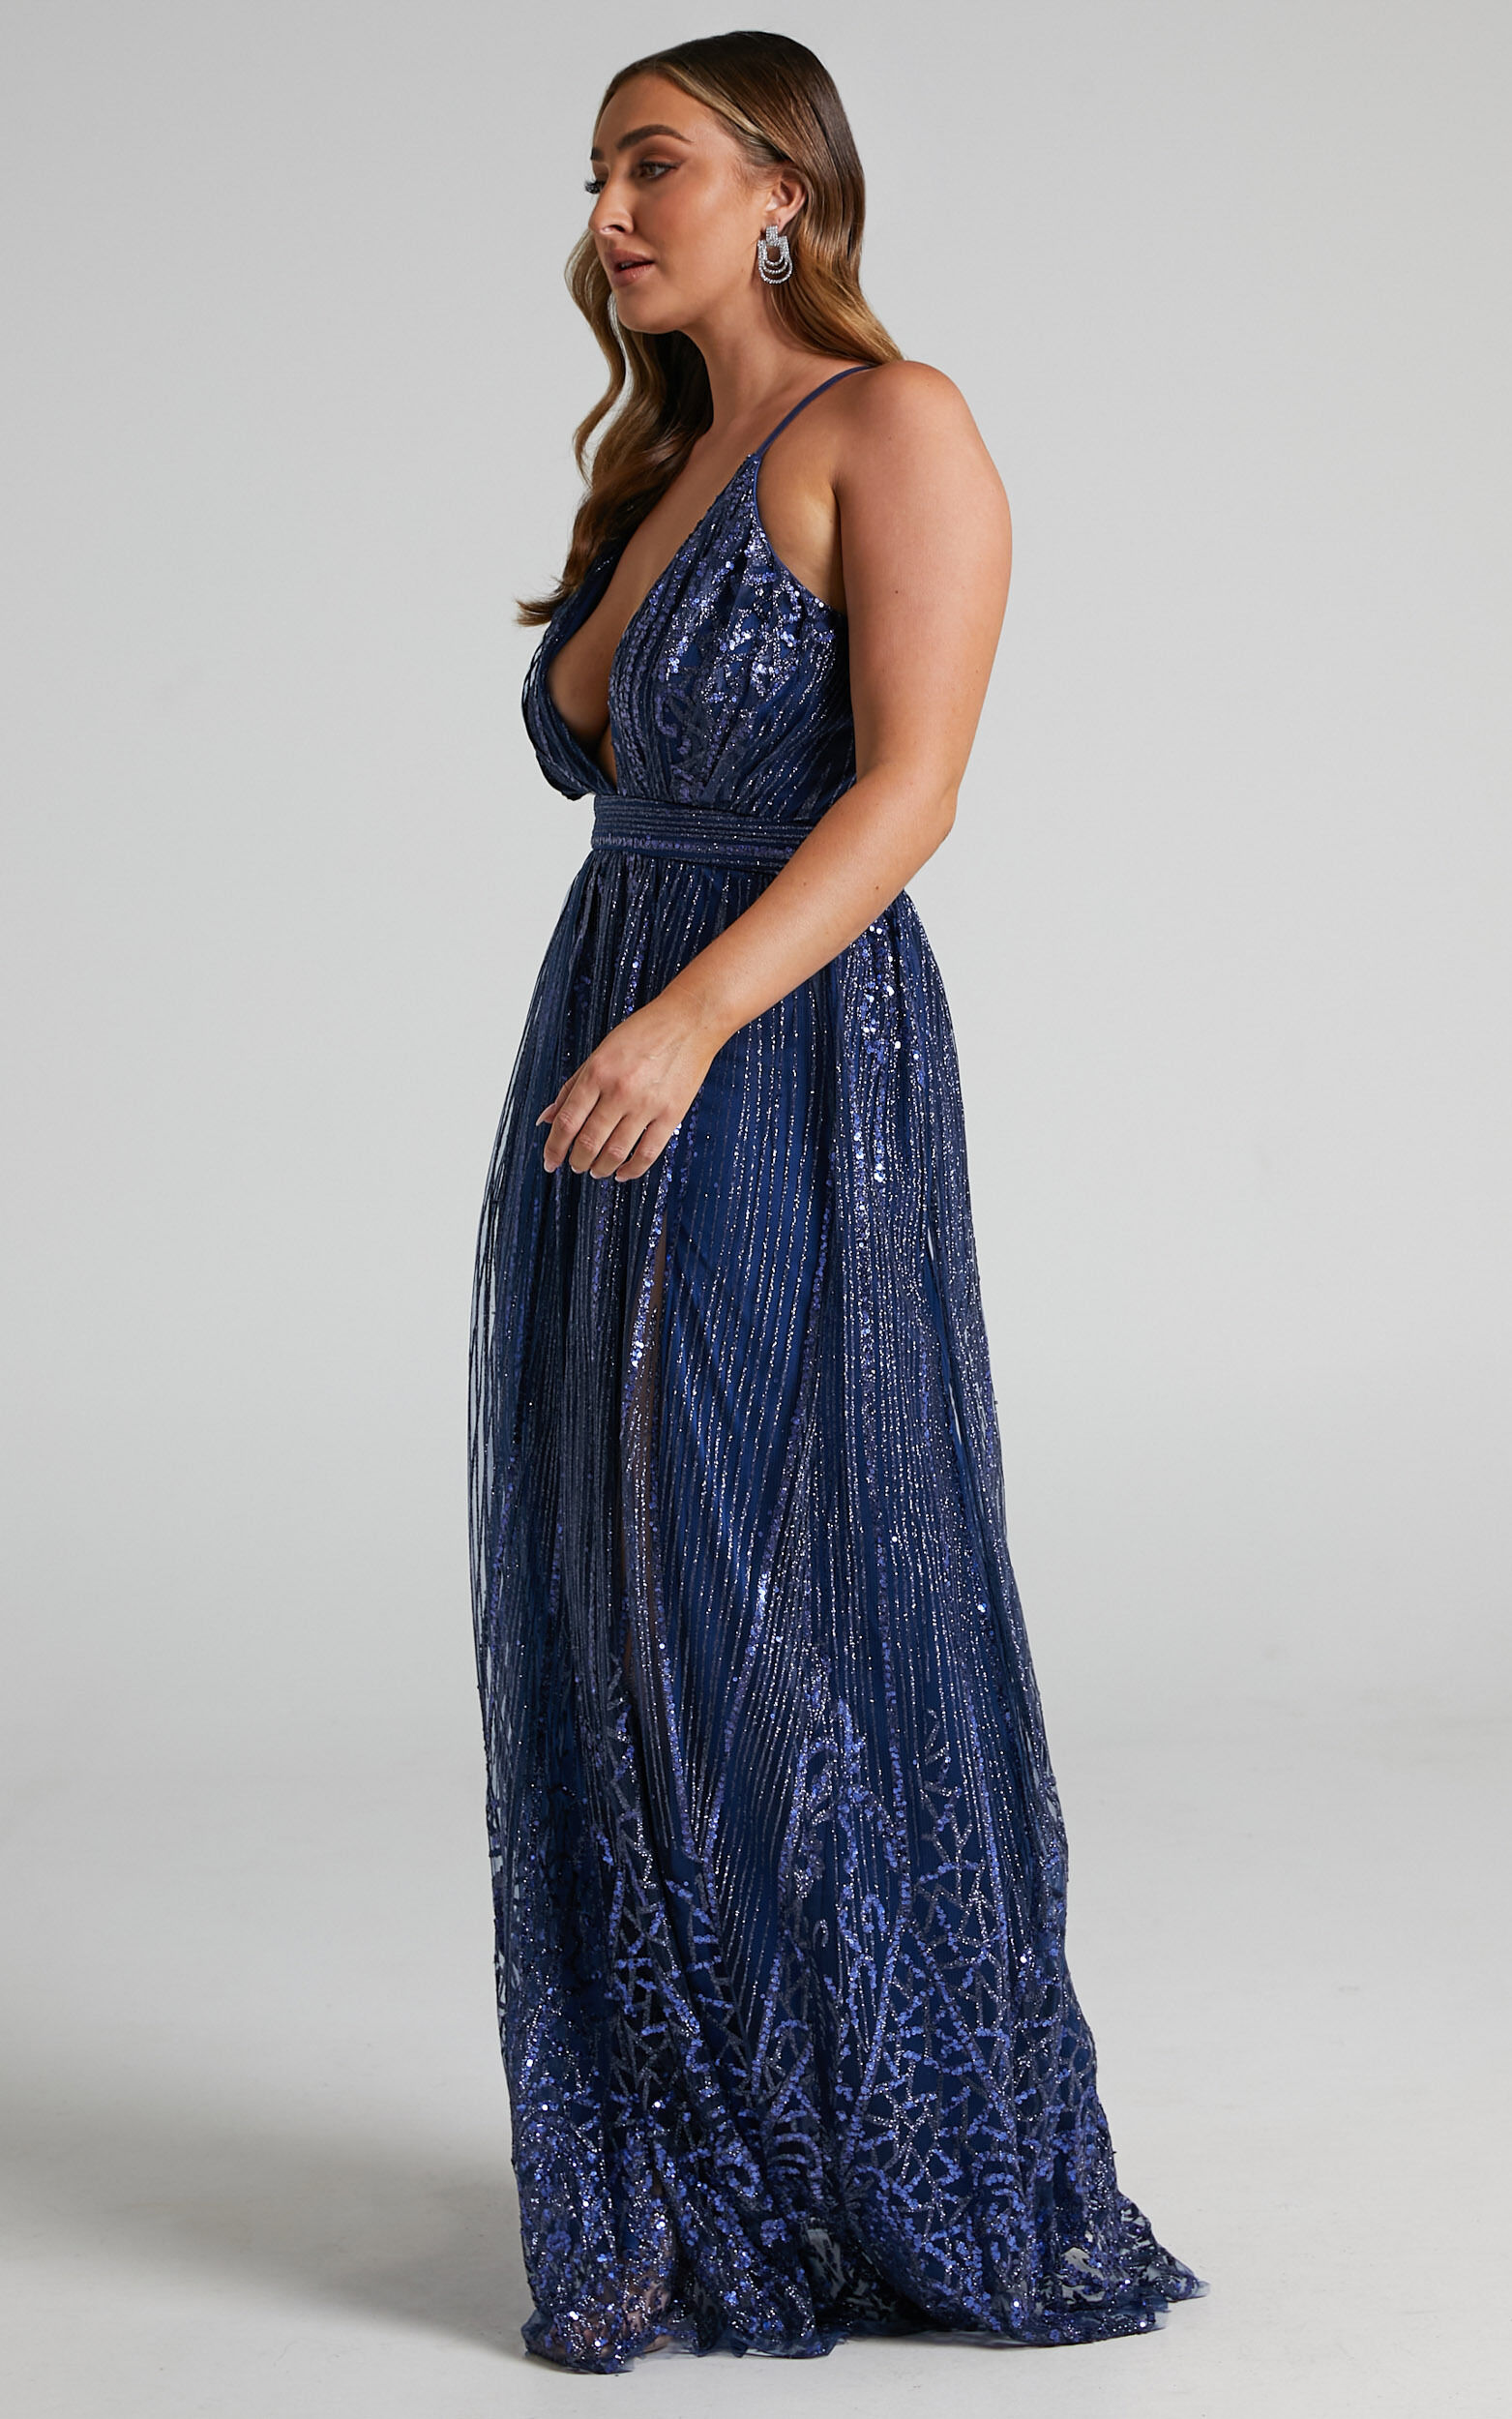 Paola Metallic Plunge Maxi Dress in Navy - 04, NVY3, super-hi-res image number null